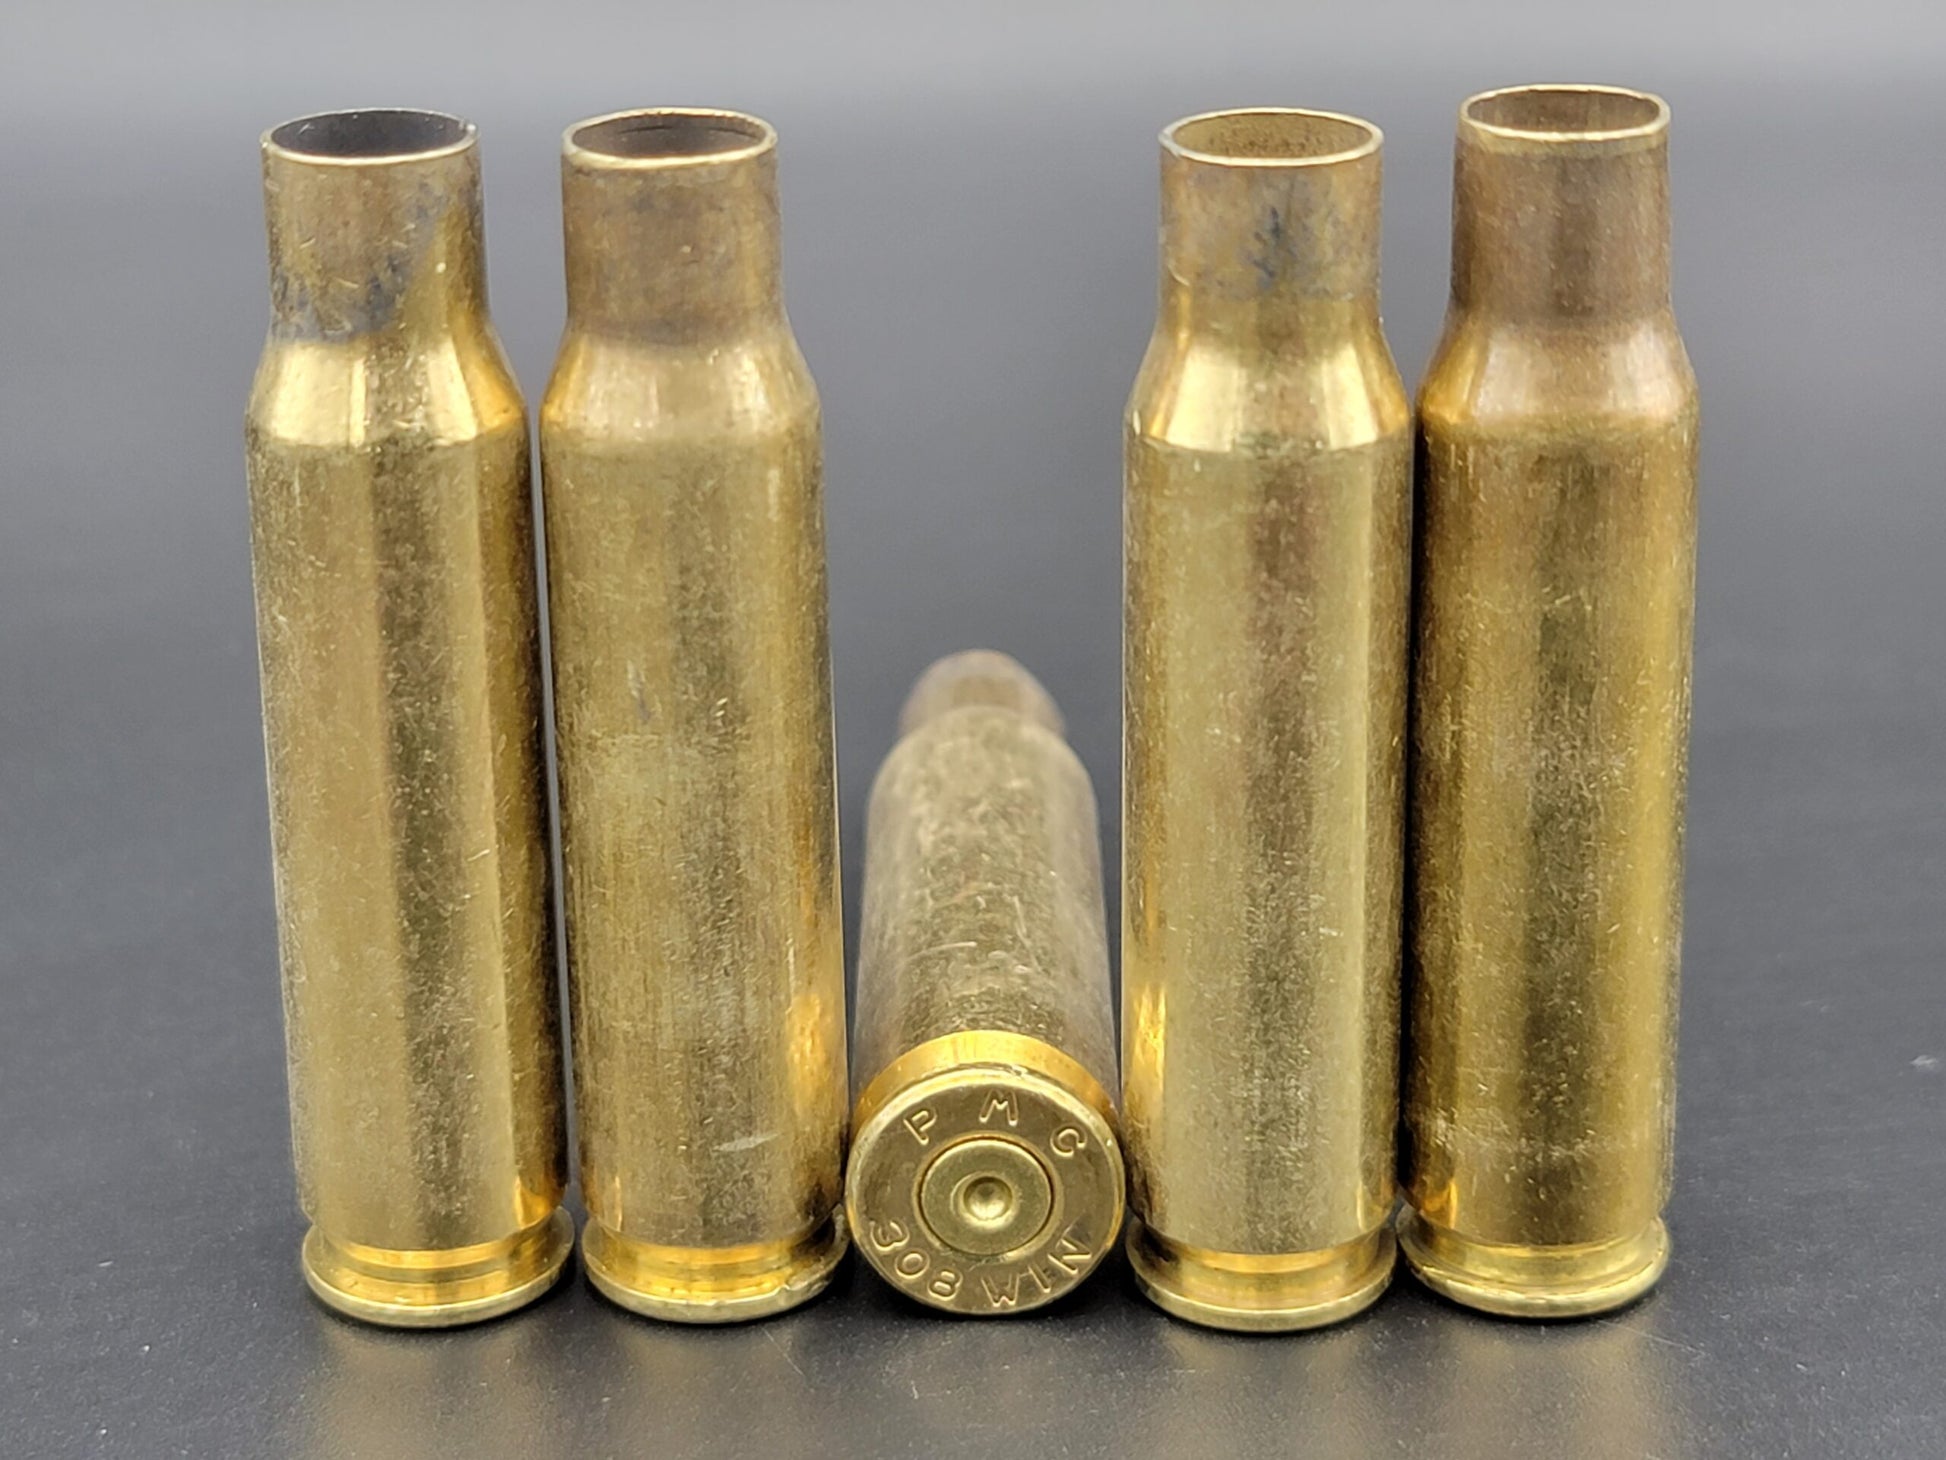 308 once fired rifle brass. Hand sorted from reputable indoor/military ranges for reloading. Reliable spent casings for precision shooting.